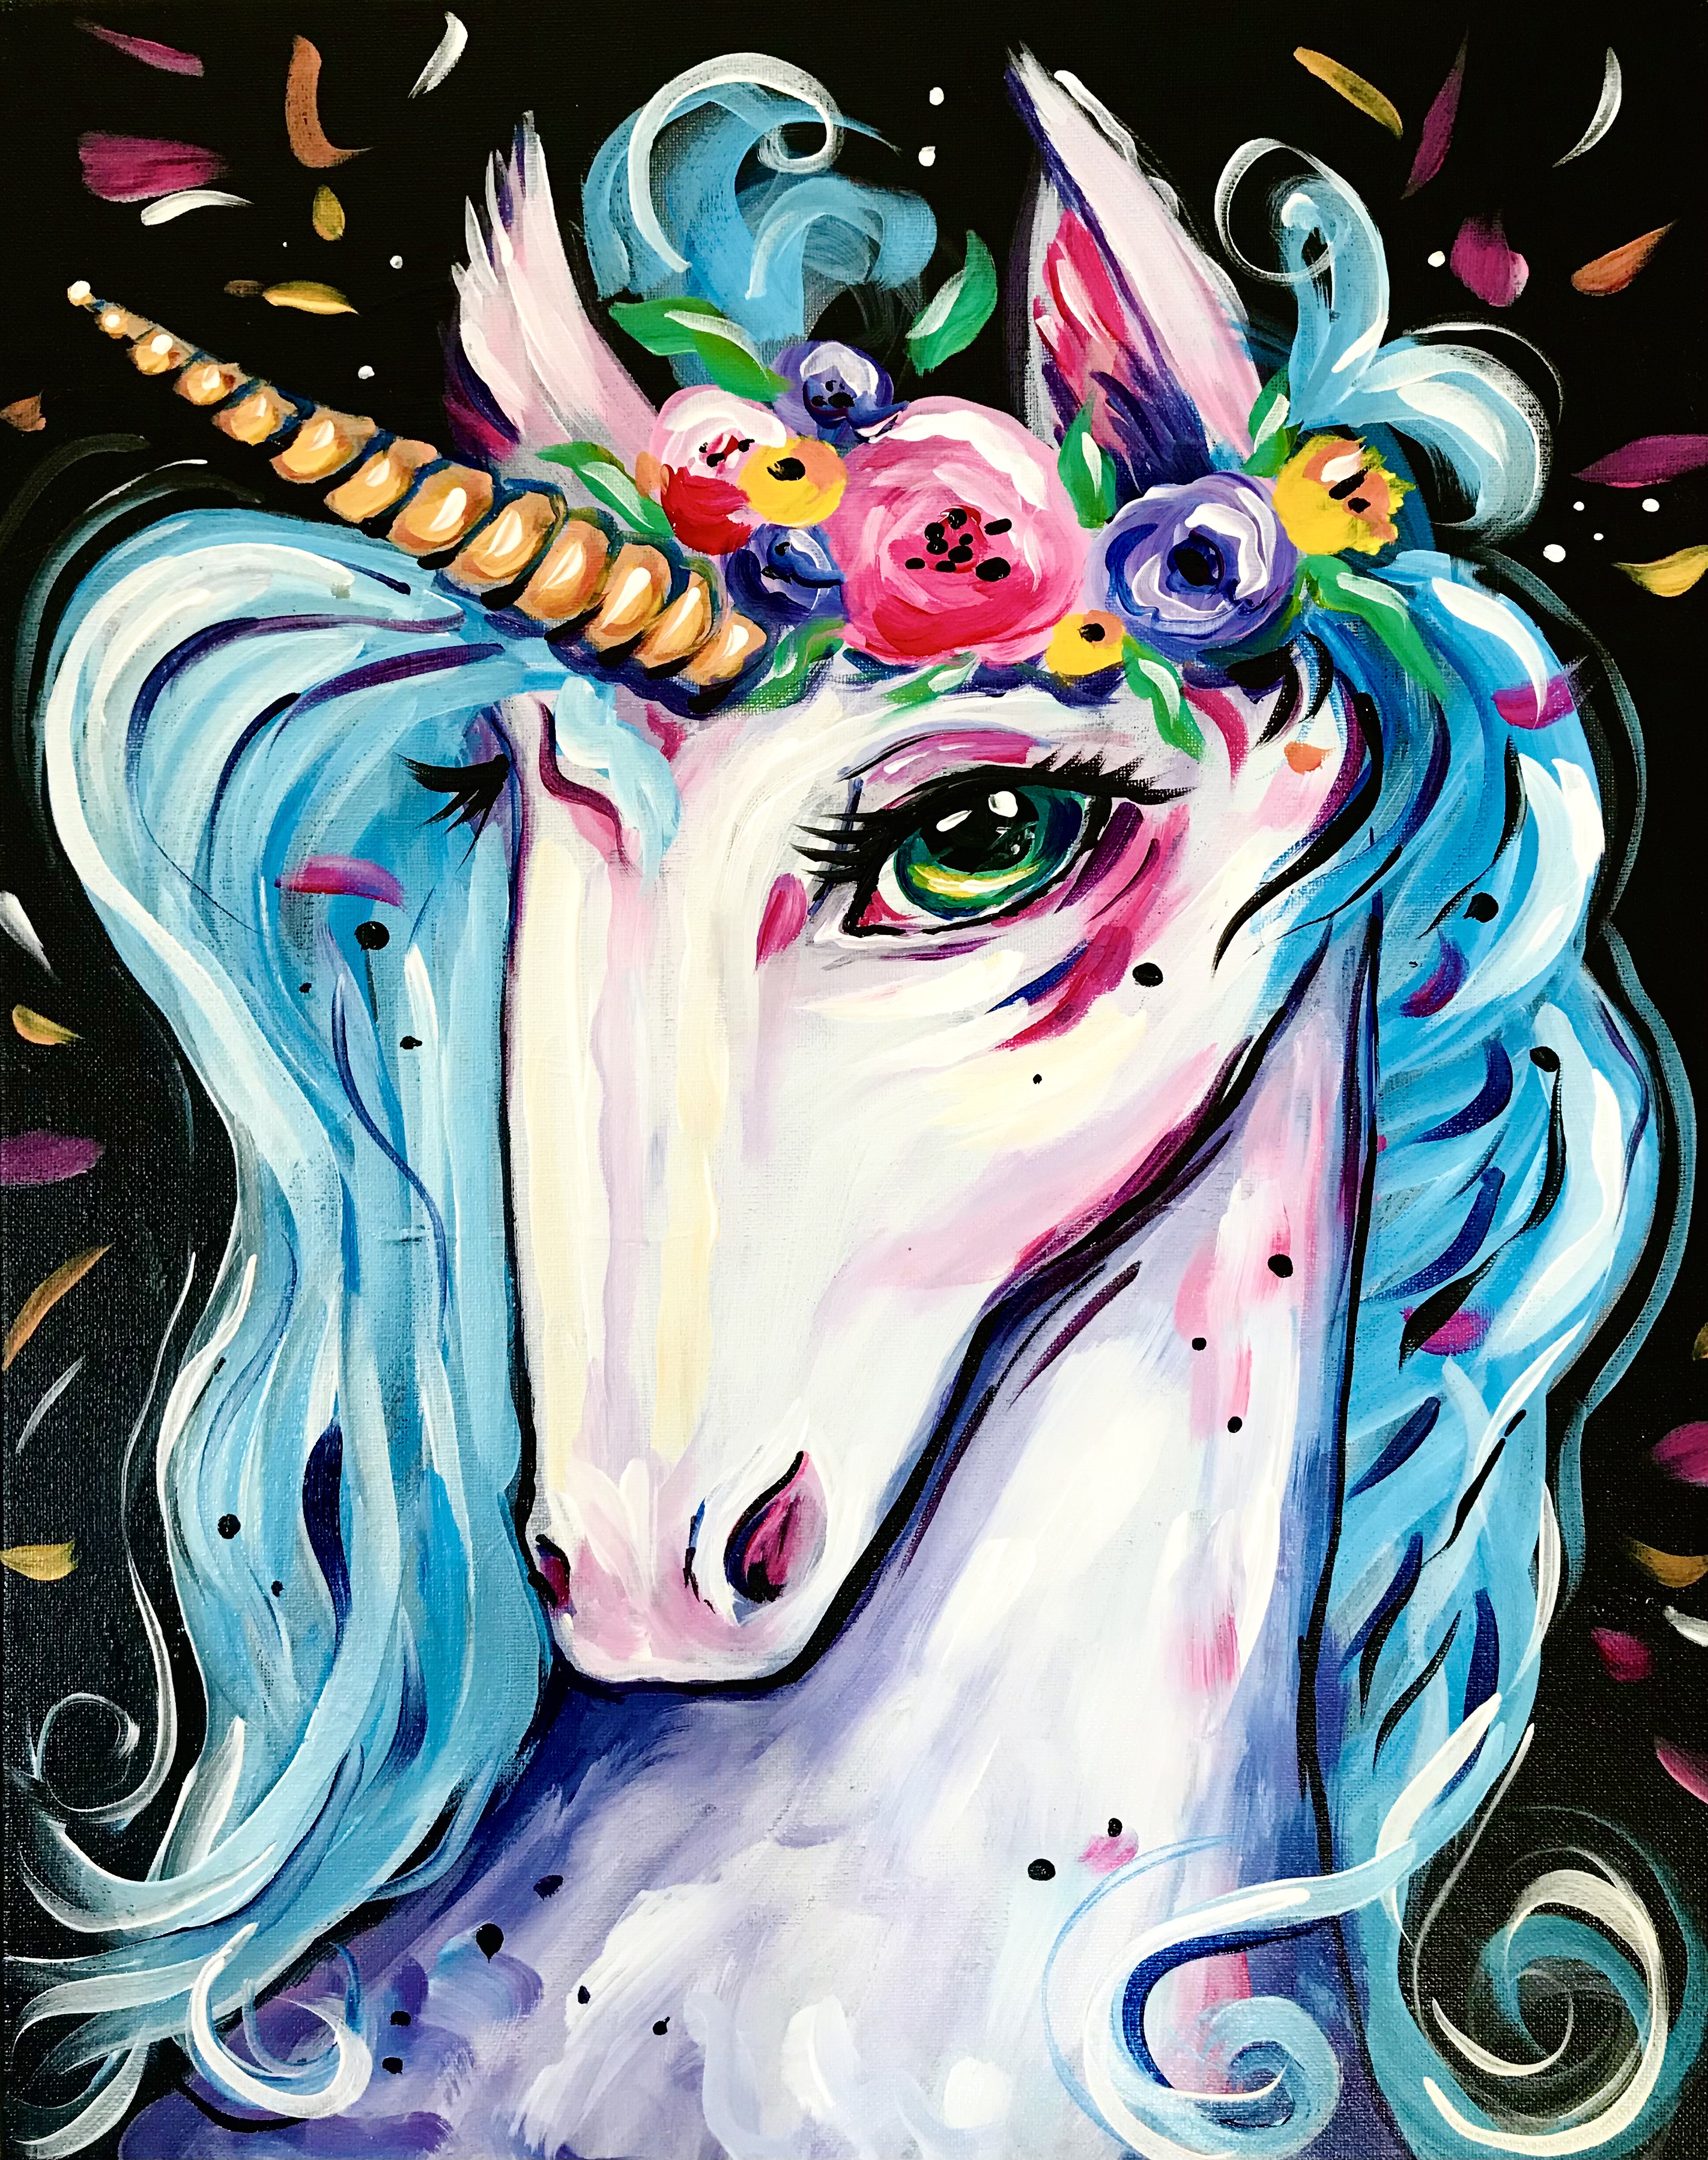 A Queen Unicorn experience project by Yaymaker